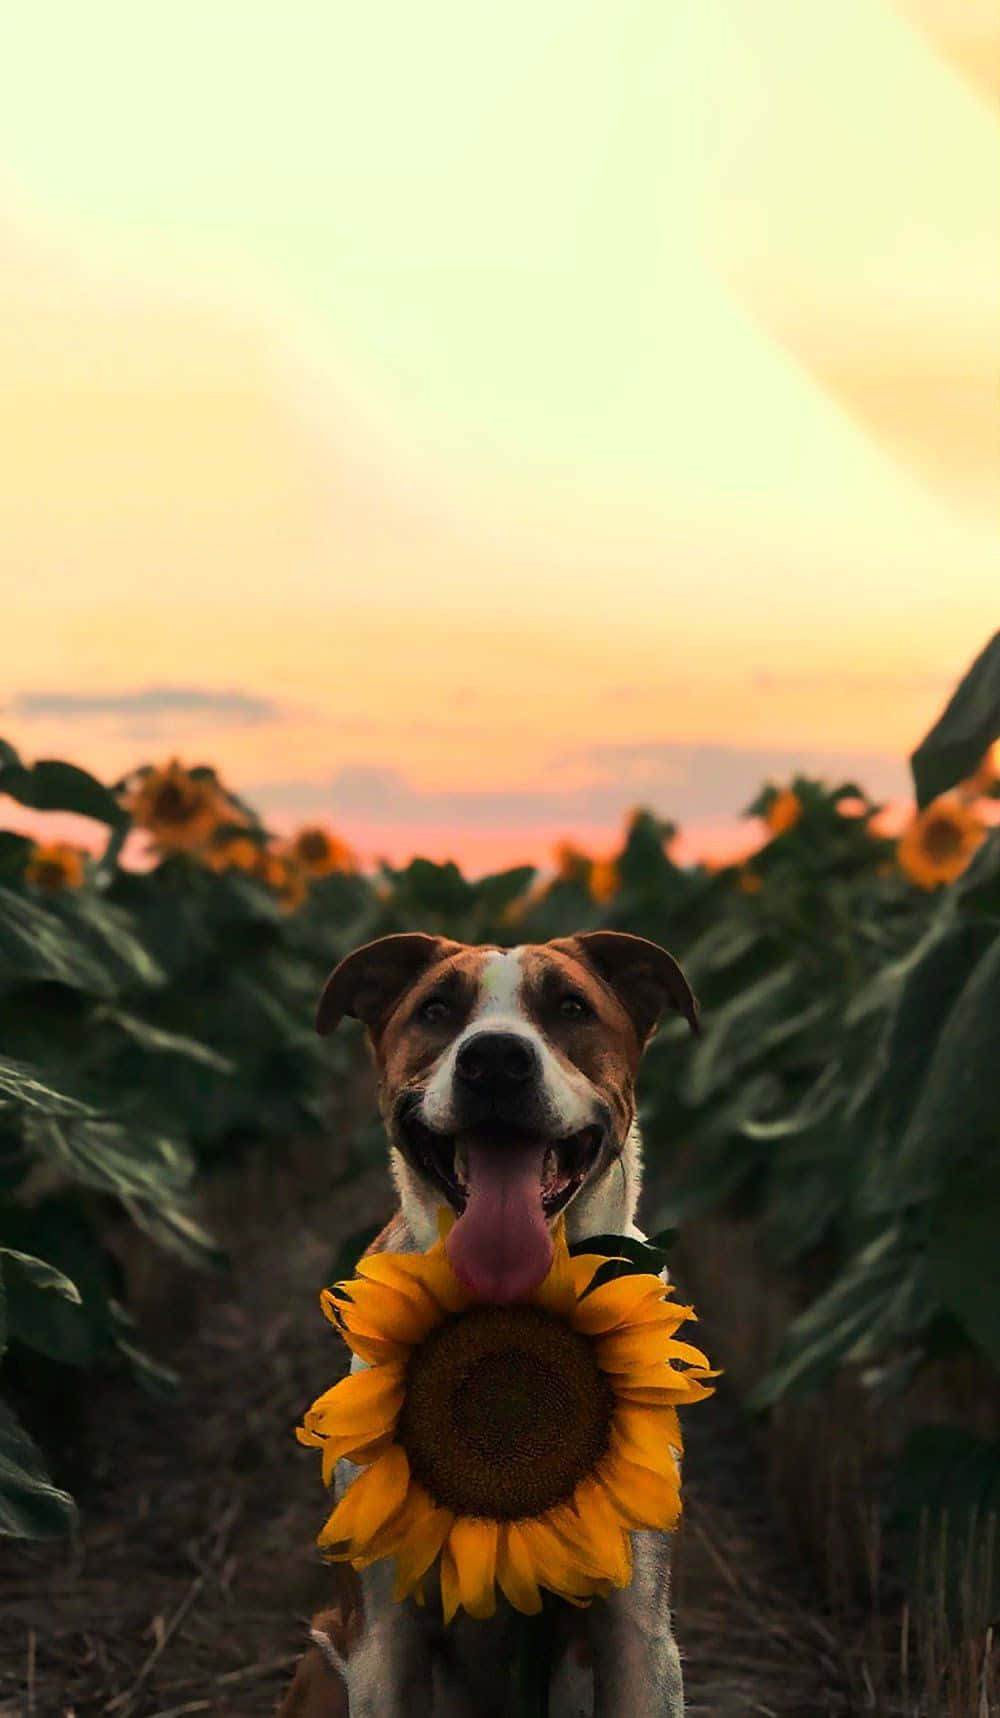 Dog With Sunflower Aesthetic Wallpaper